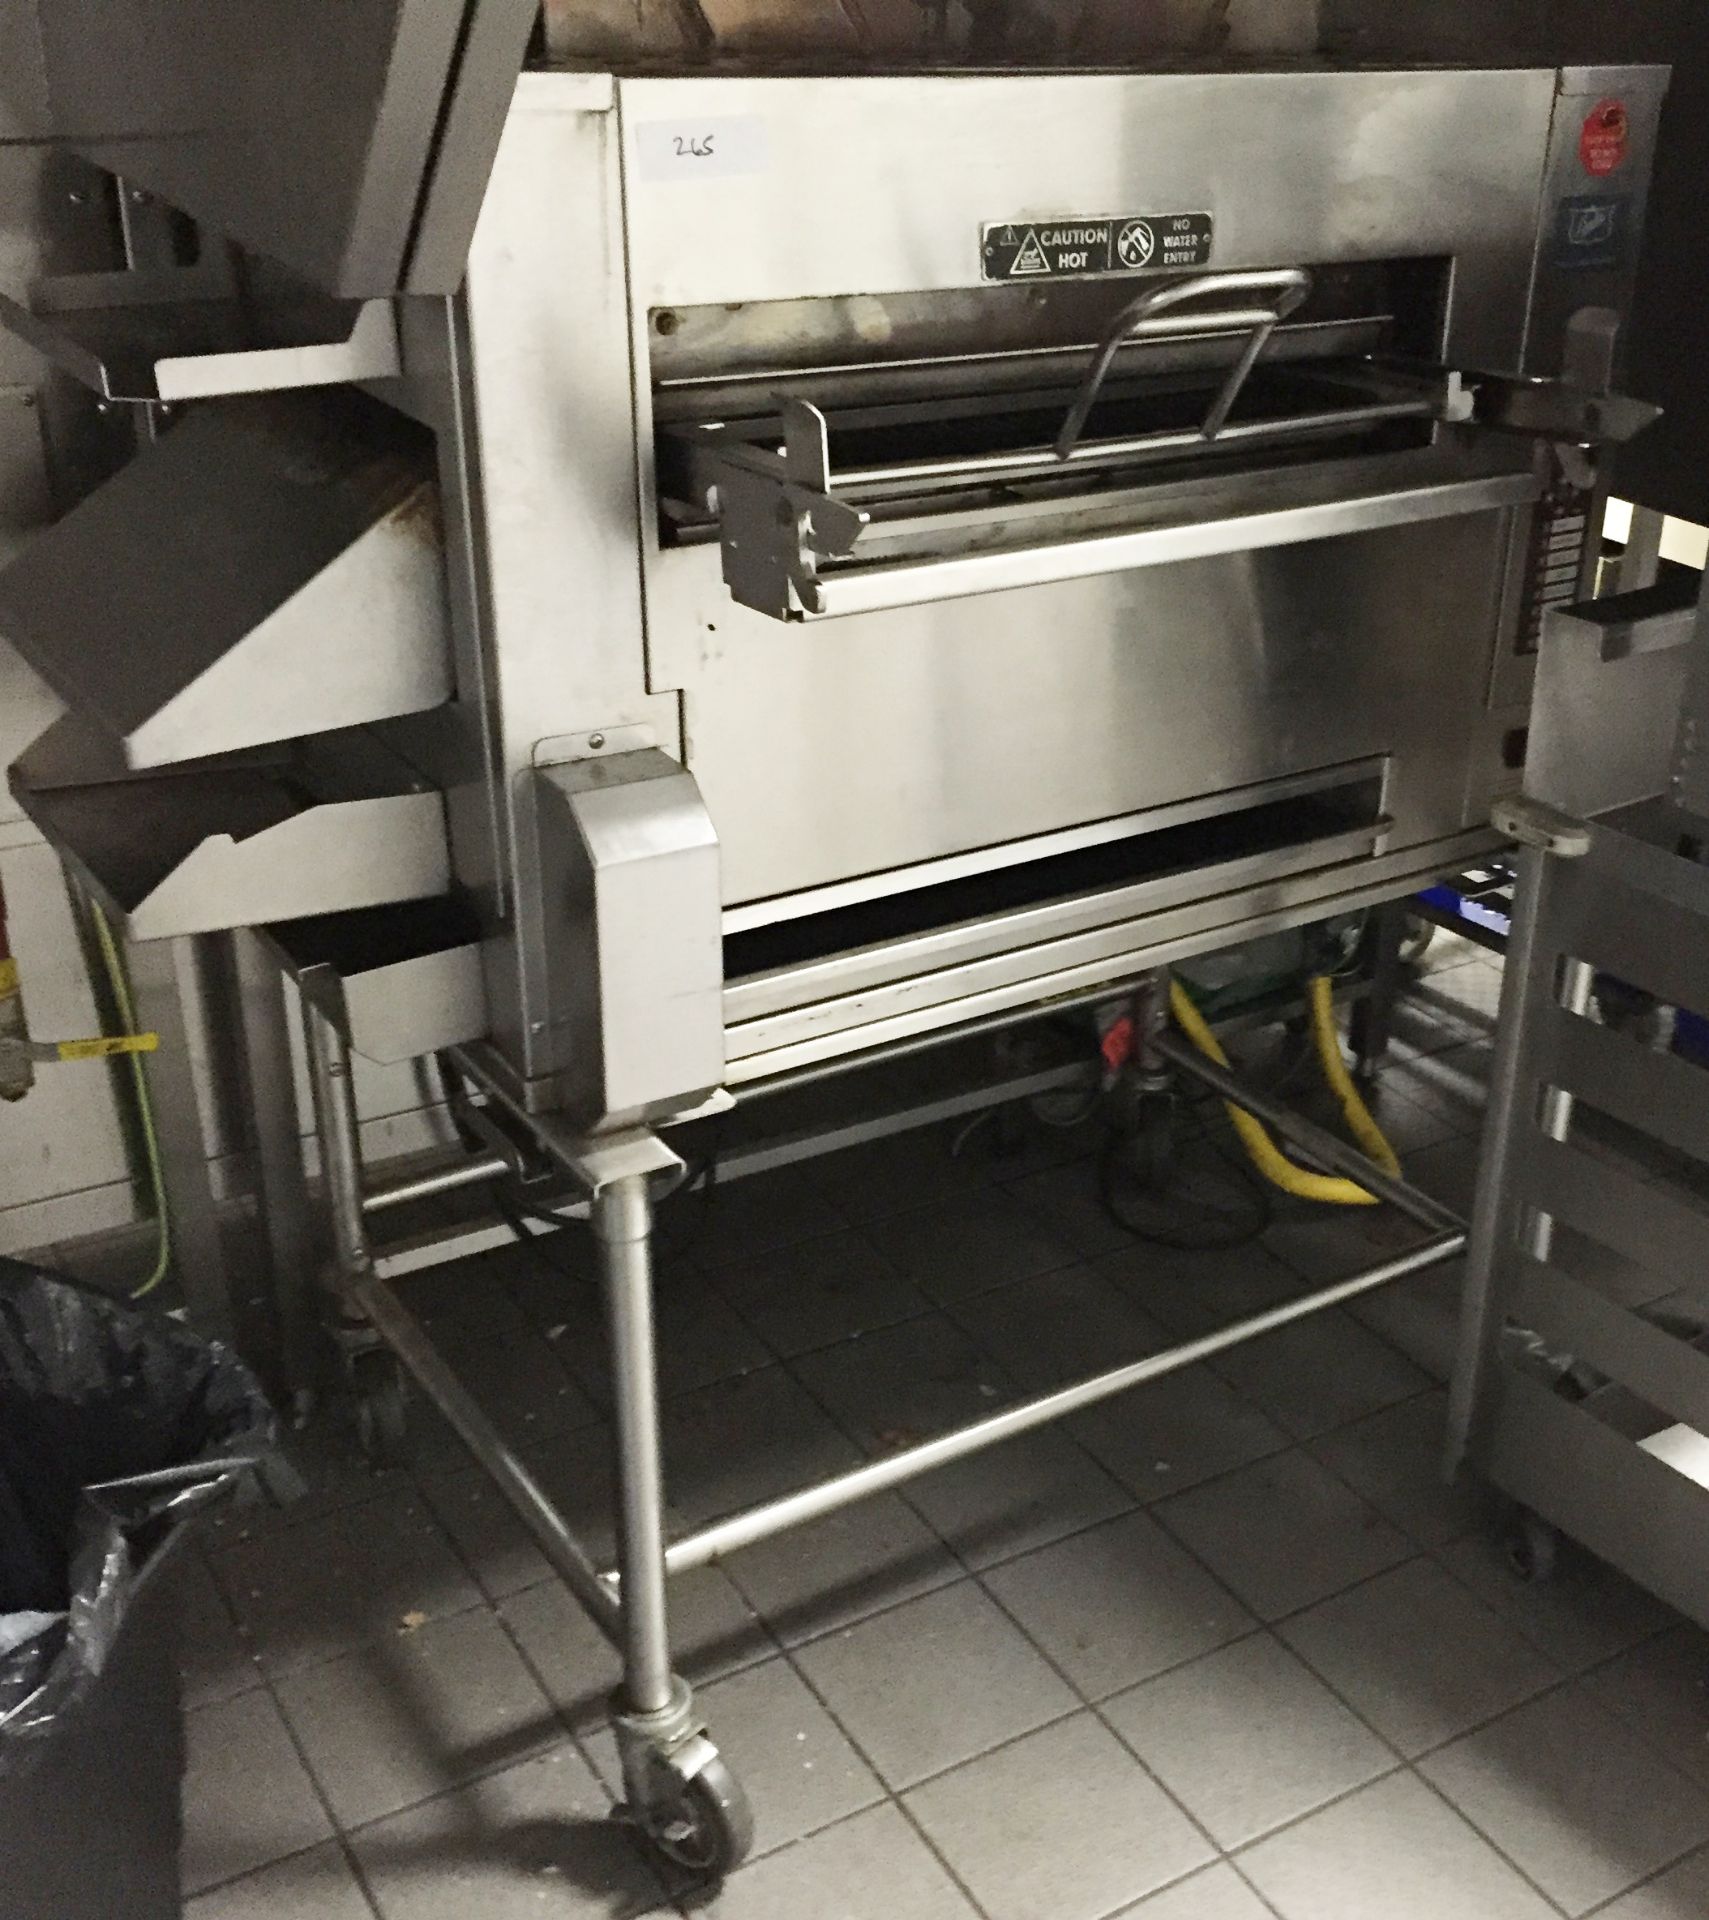 1 x Duke Flexible Batch Broiler - Used in Burger King Restaurants - Flame Broils a Batch of - Image 6 of 6